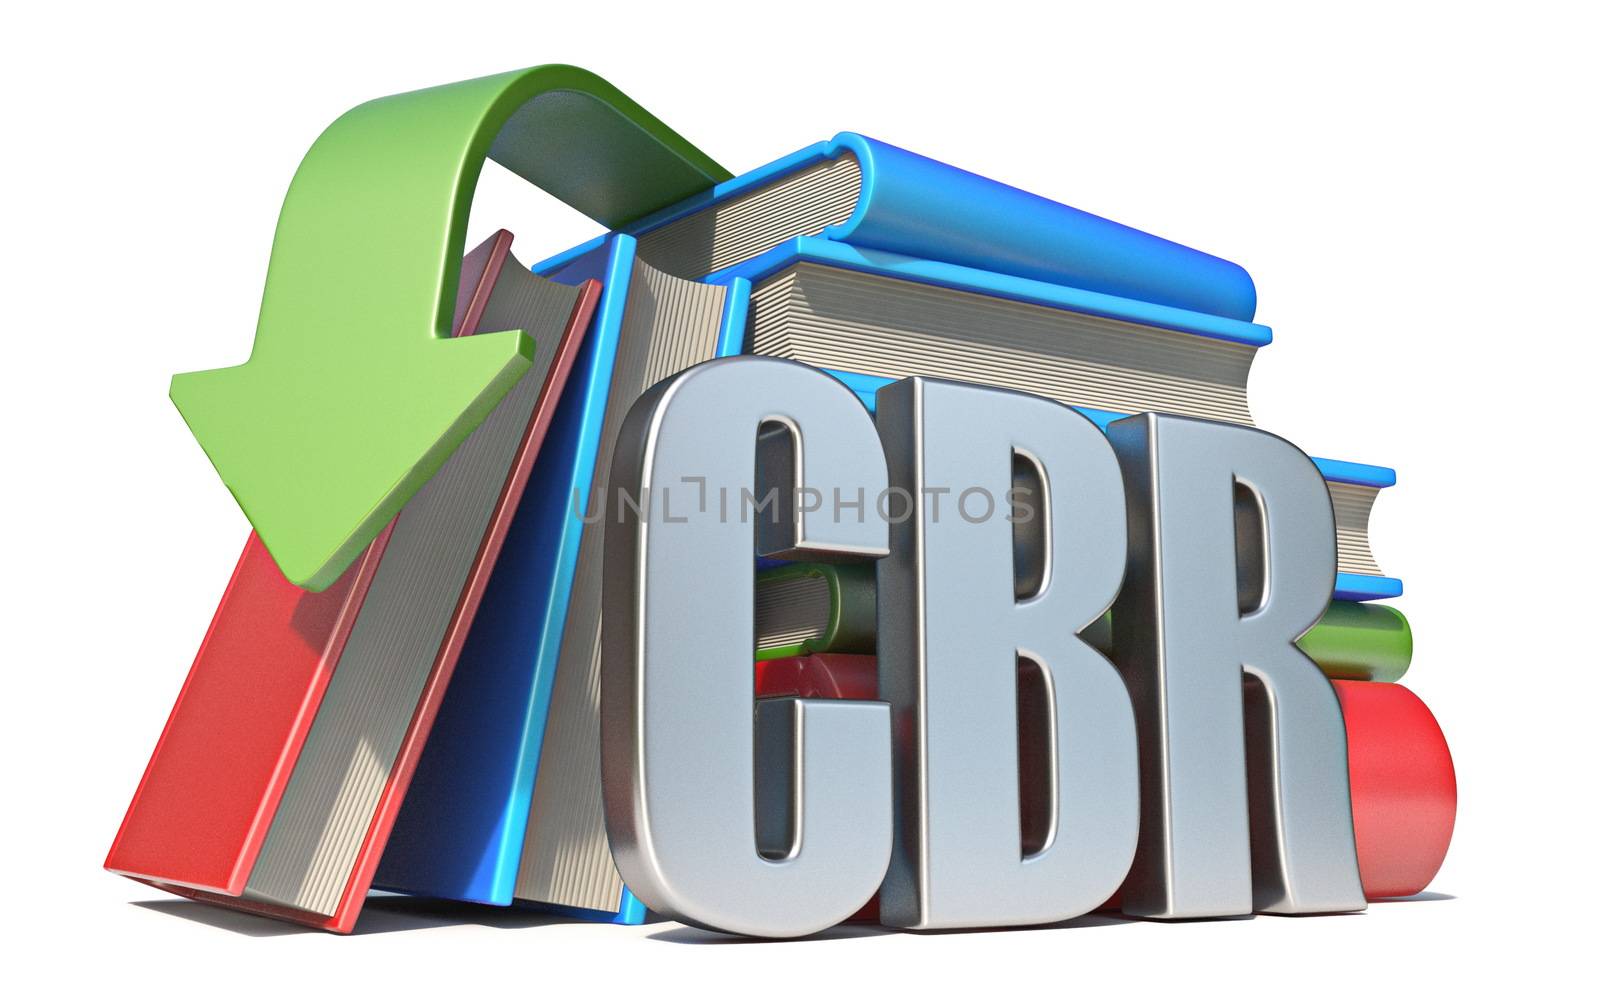 eBook CBR download concept 3D render illustration isolated on white background